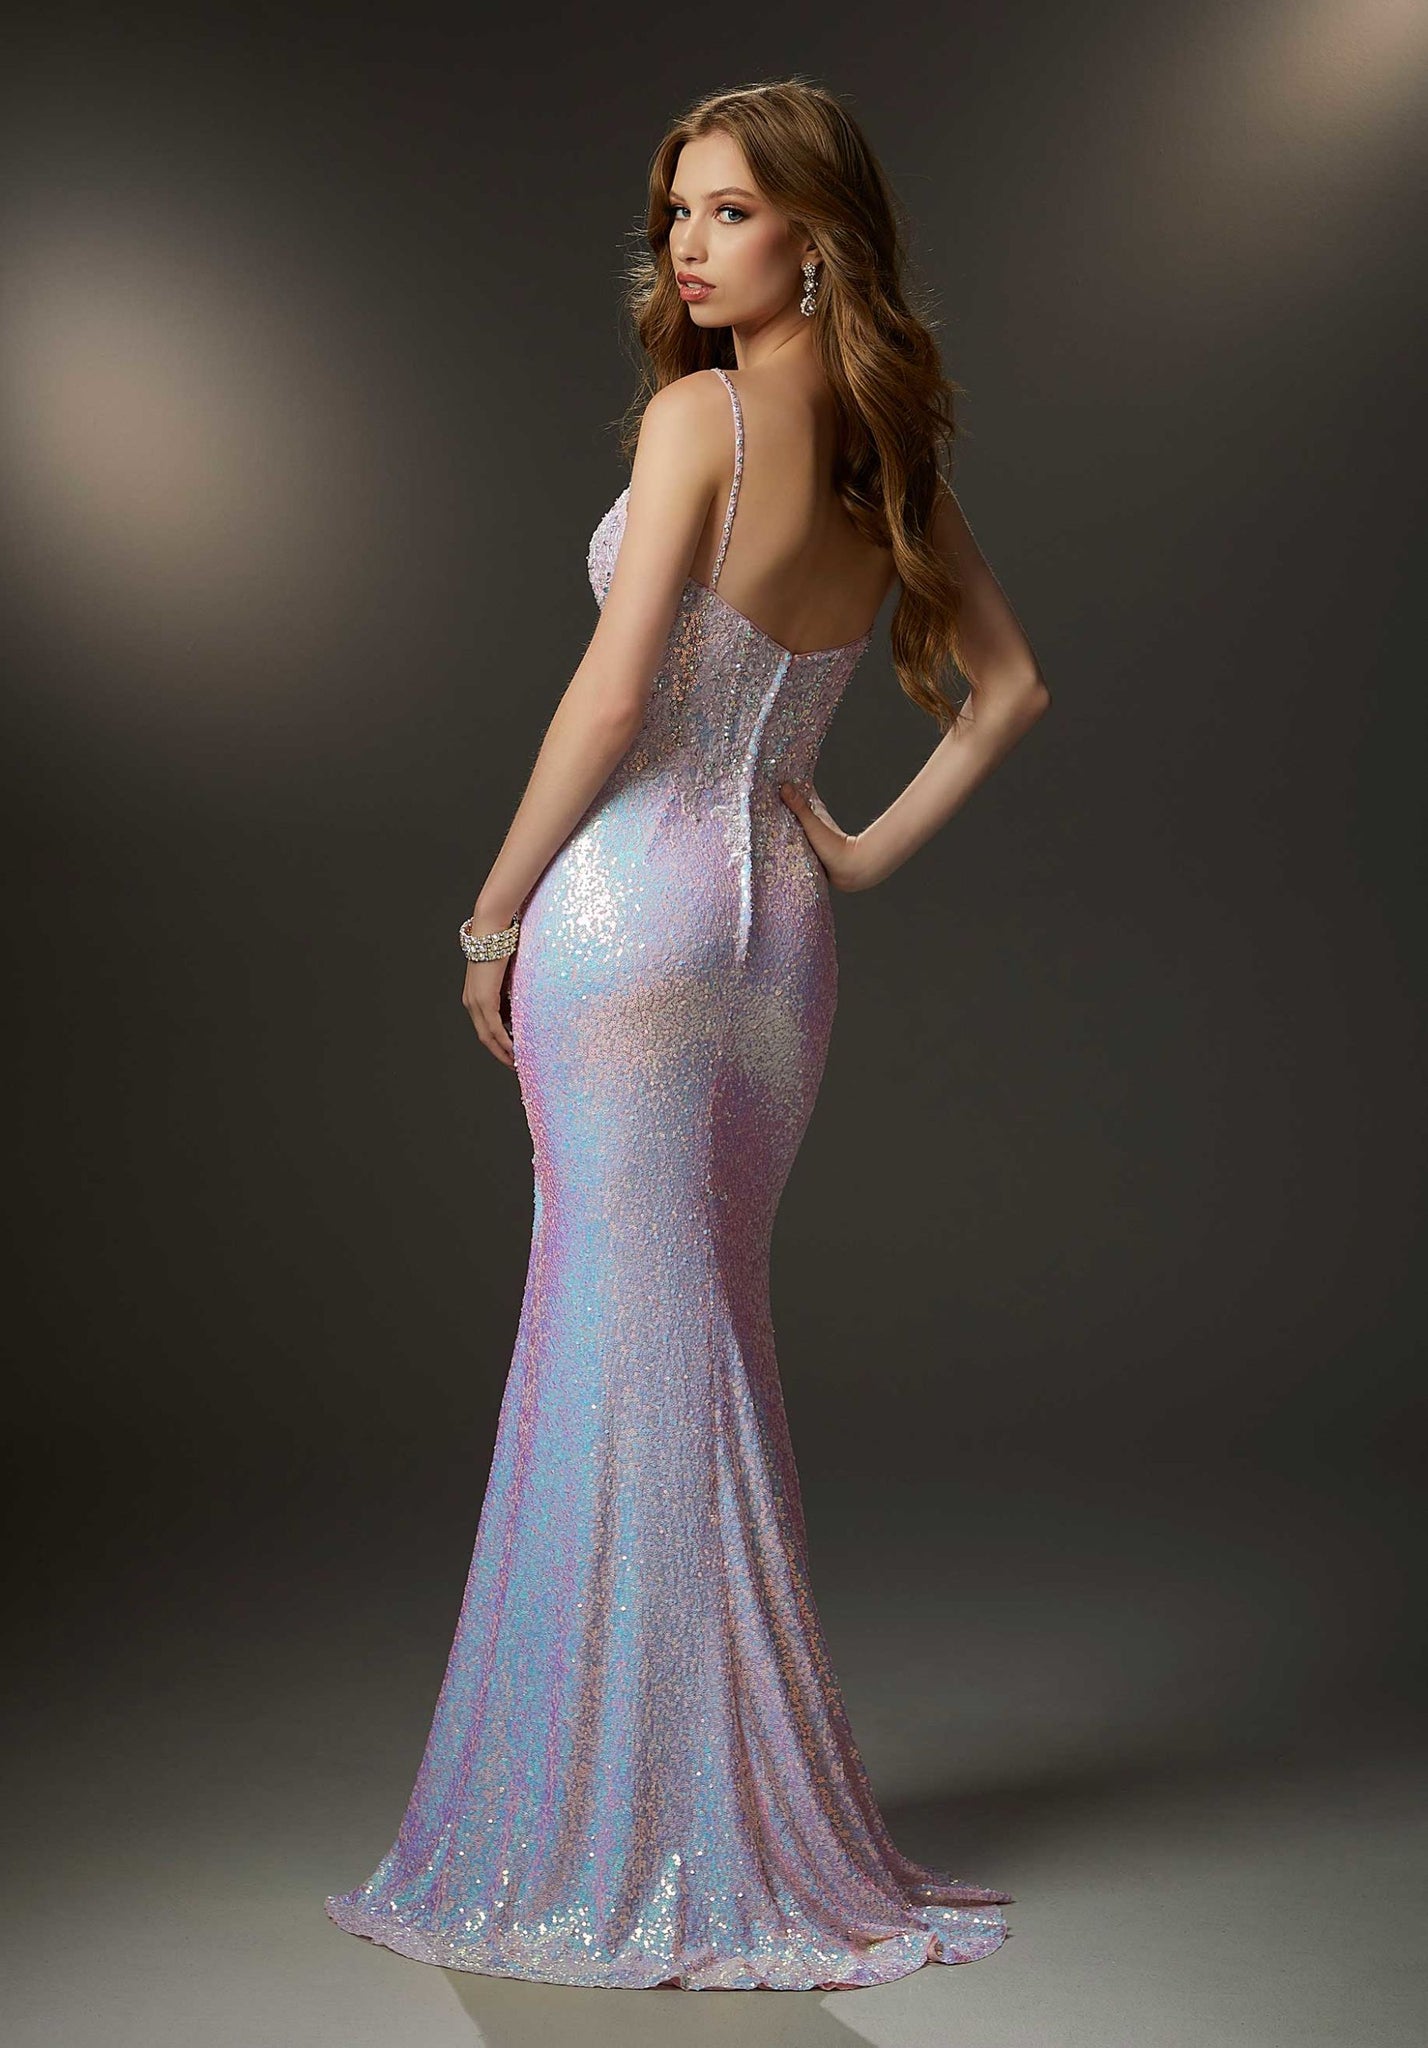 Glamorous prom dress in glistening allover sequin fabric with a chic boned v-neck bodice featuring blingy crystal beaded embroidery and a sultry skirt slit.